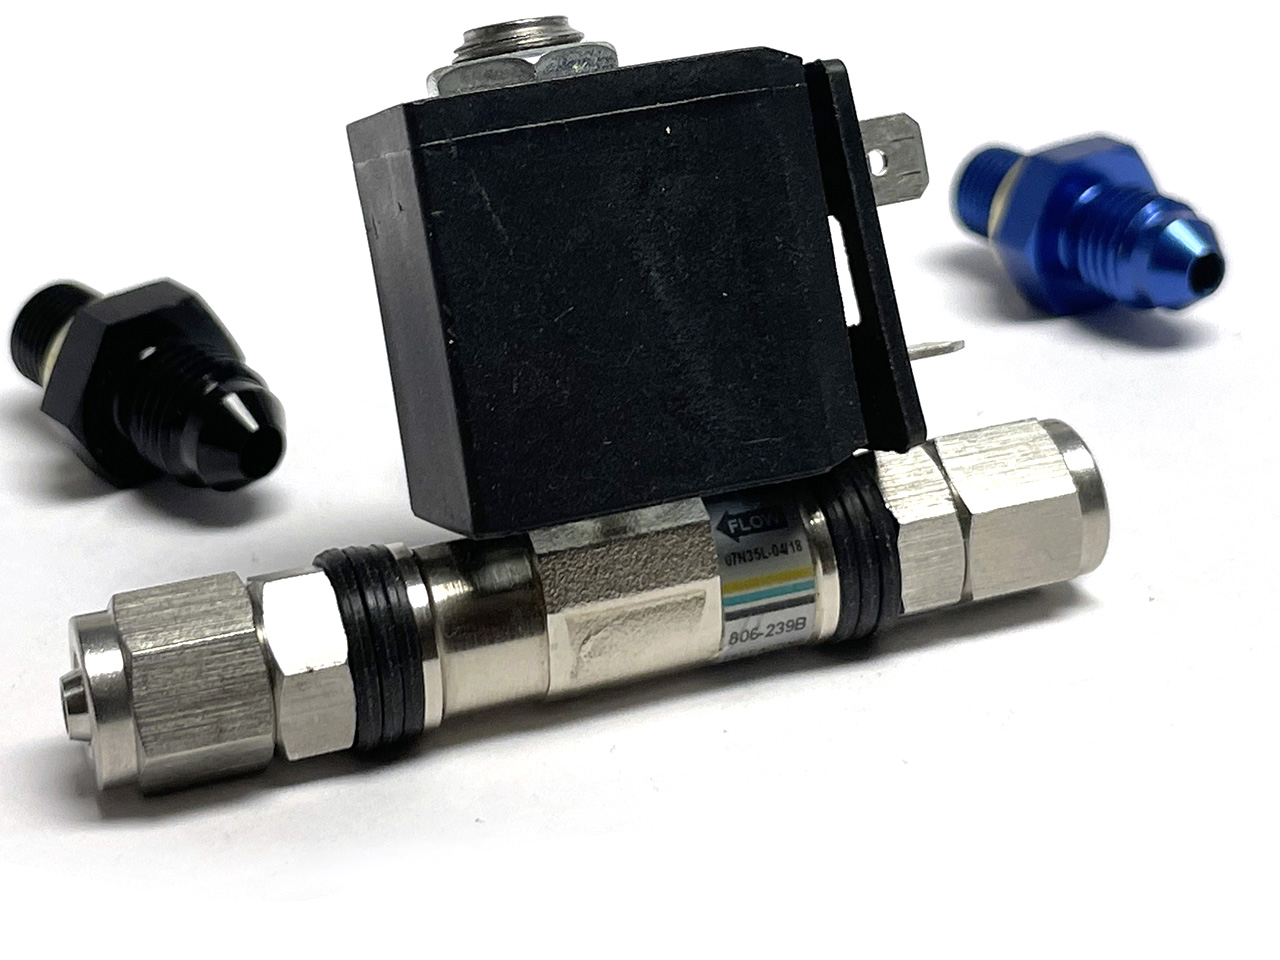 1/8 BSPP to 4AN adapter for Aquamist water/methanol injection